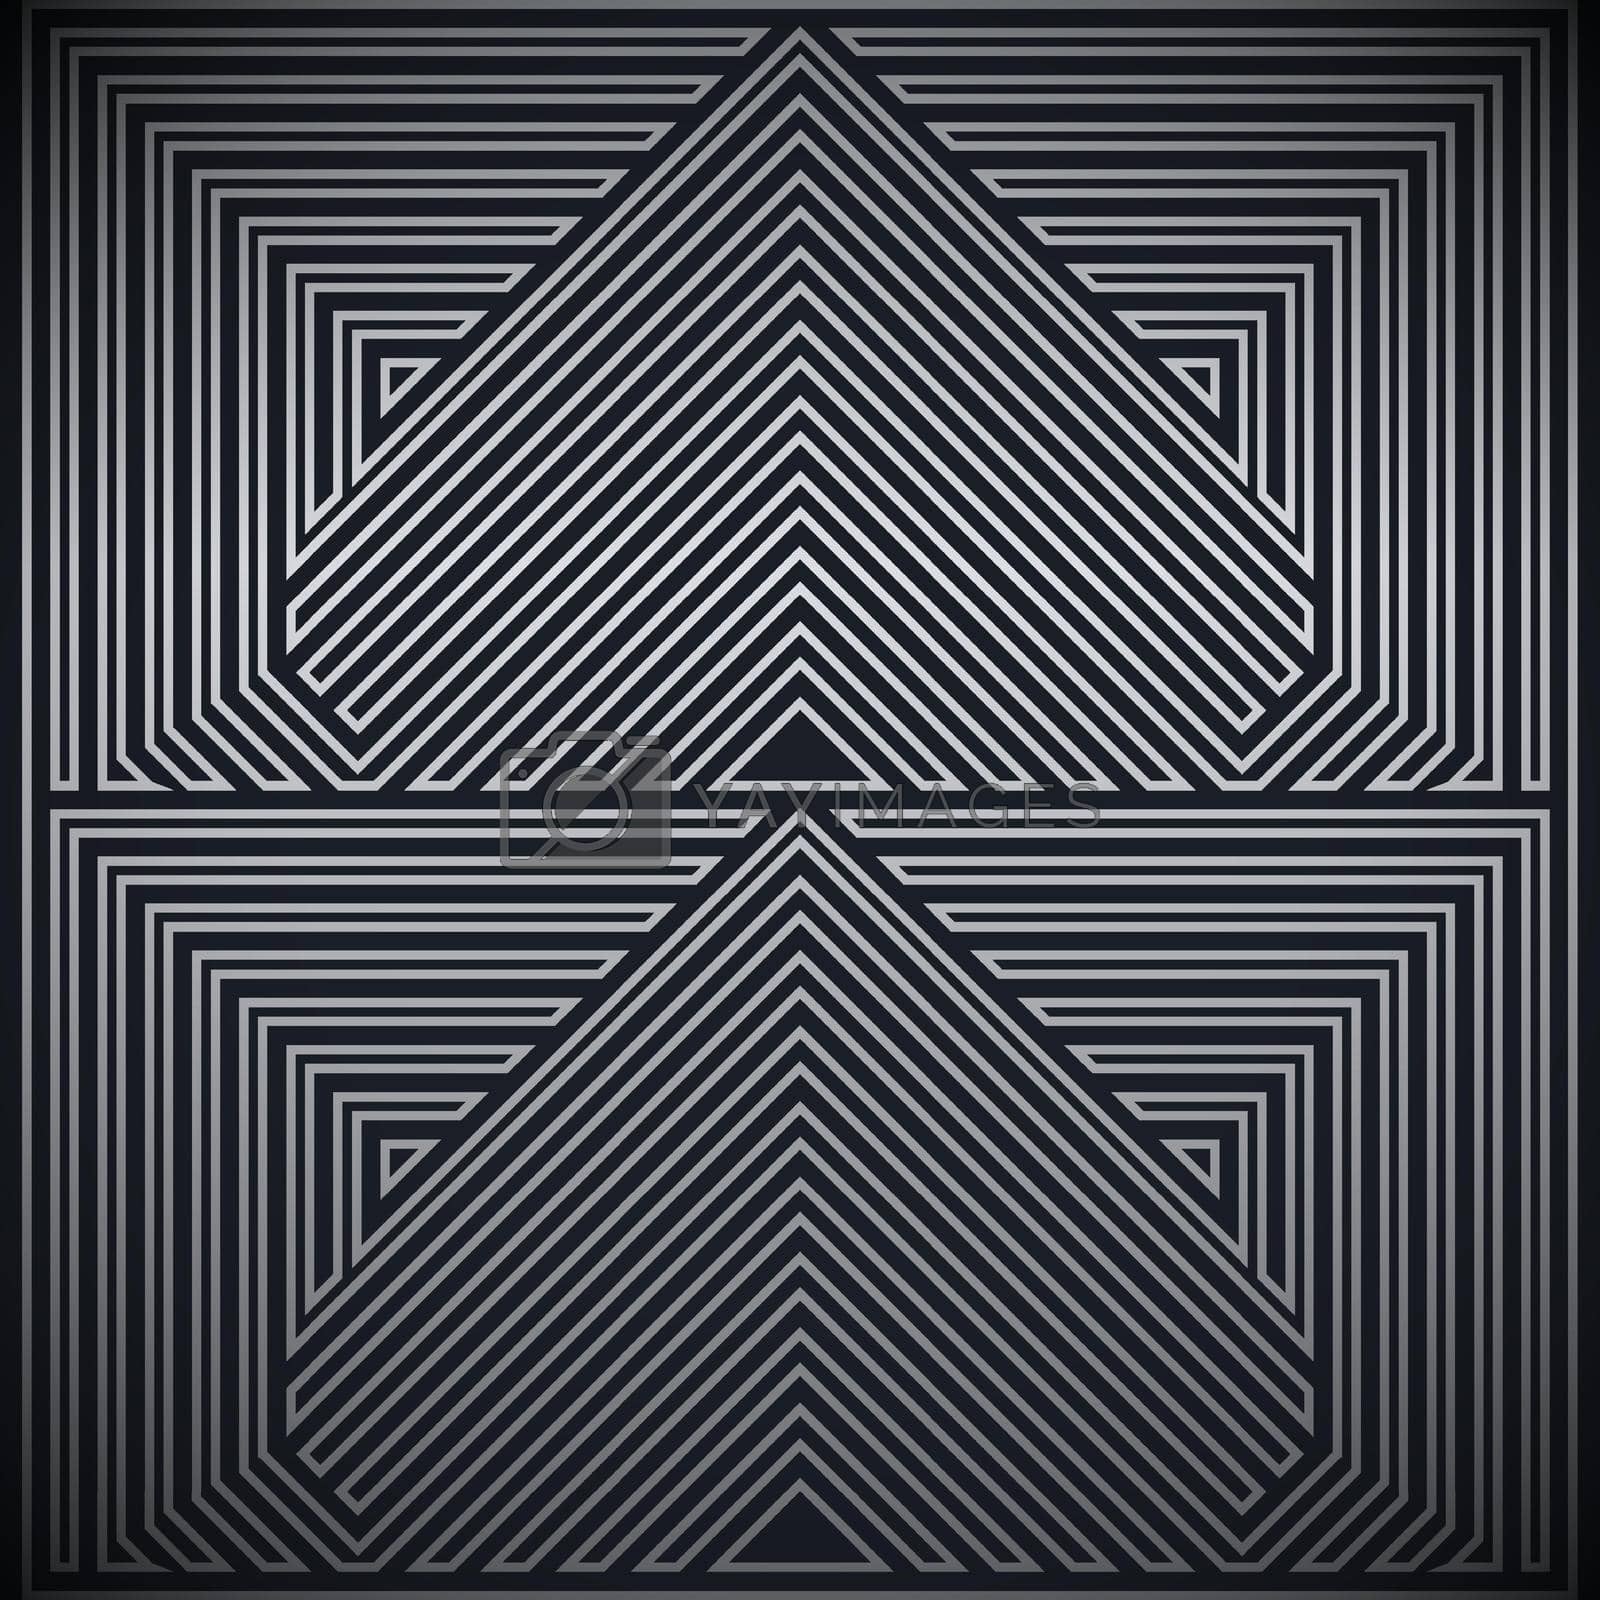 Royalty free image of Geometric abstract background with silver and black color  by Menyoen